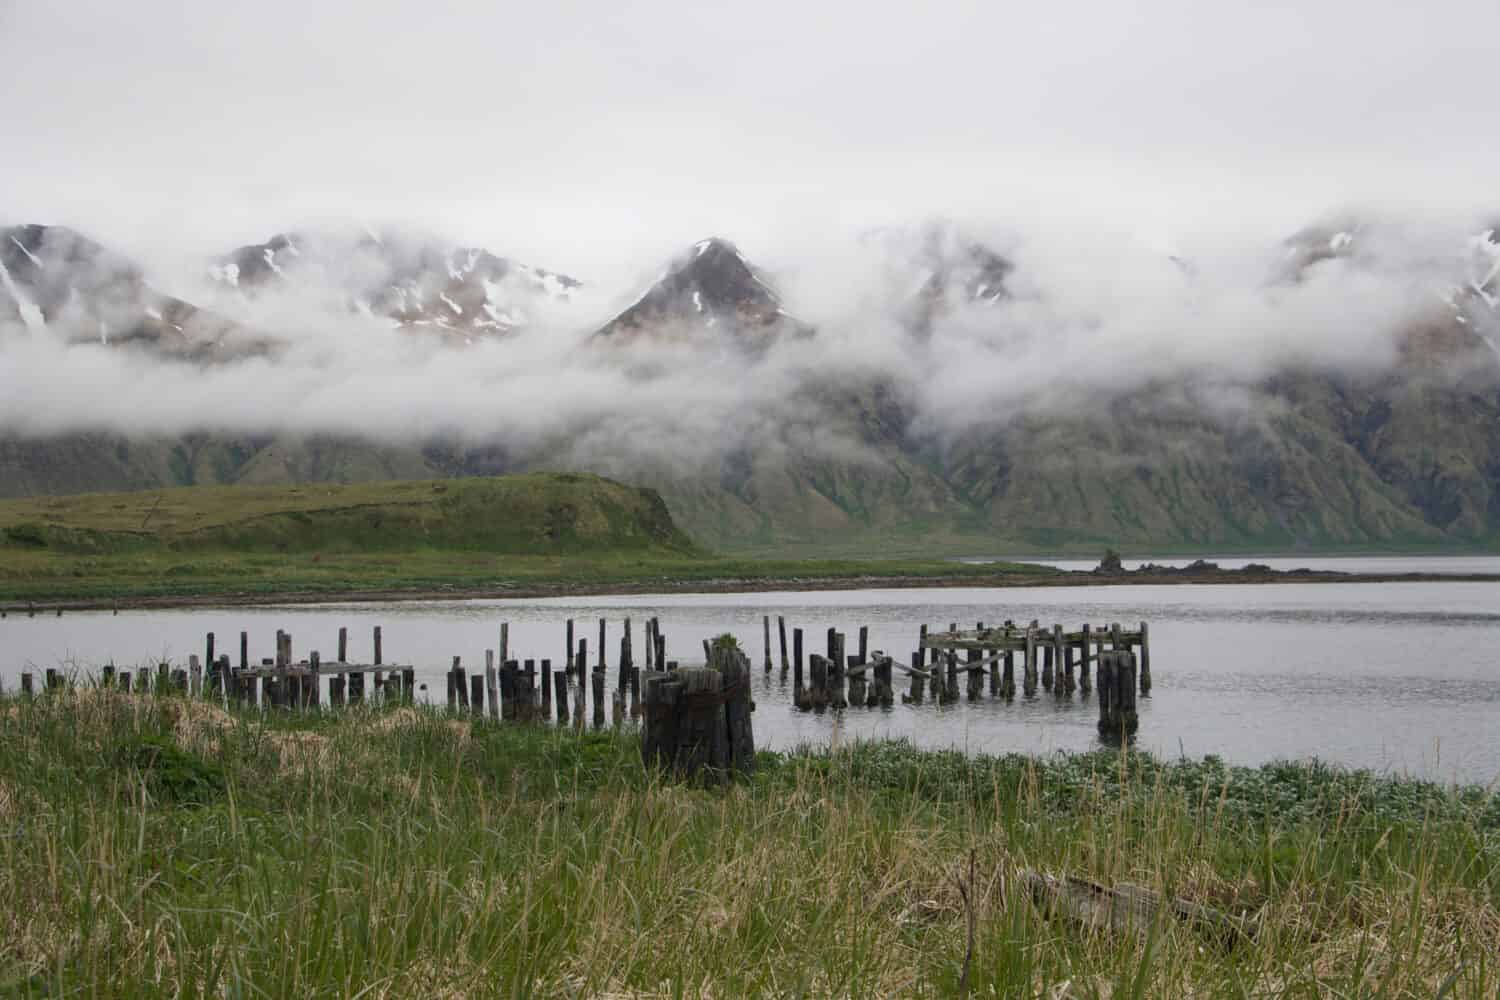 view of massacre bay, island of Attu, Aleutians with mountains and low clouds